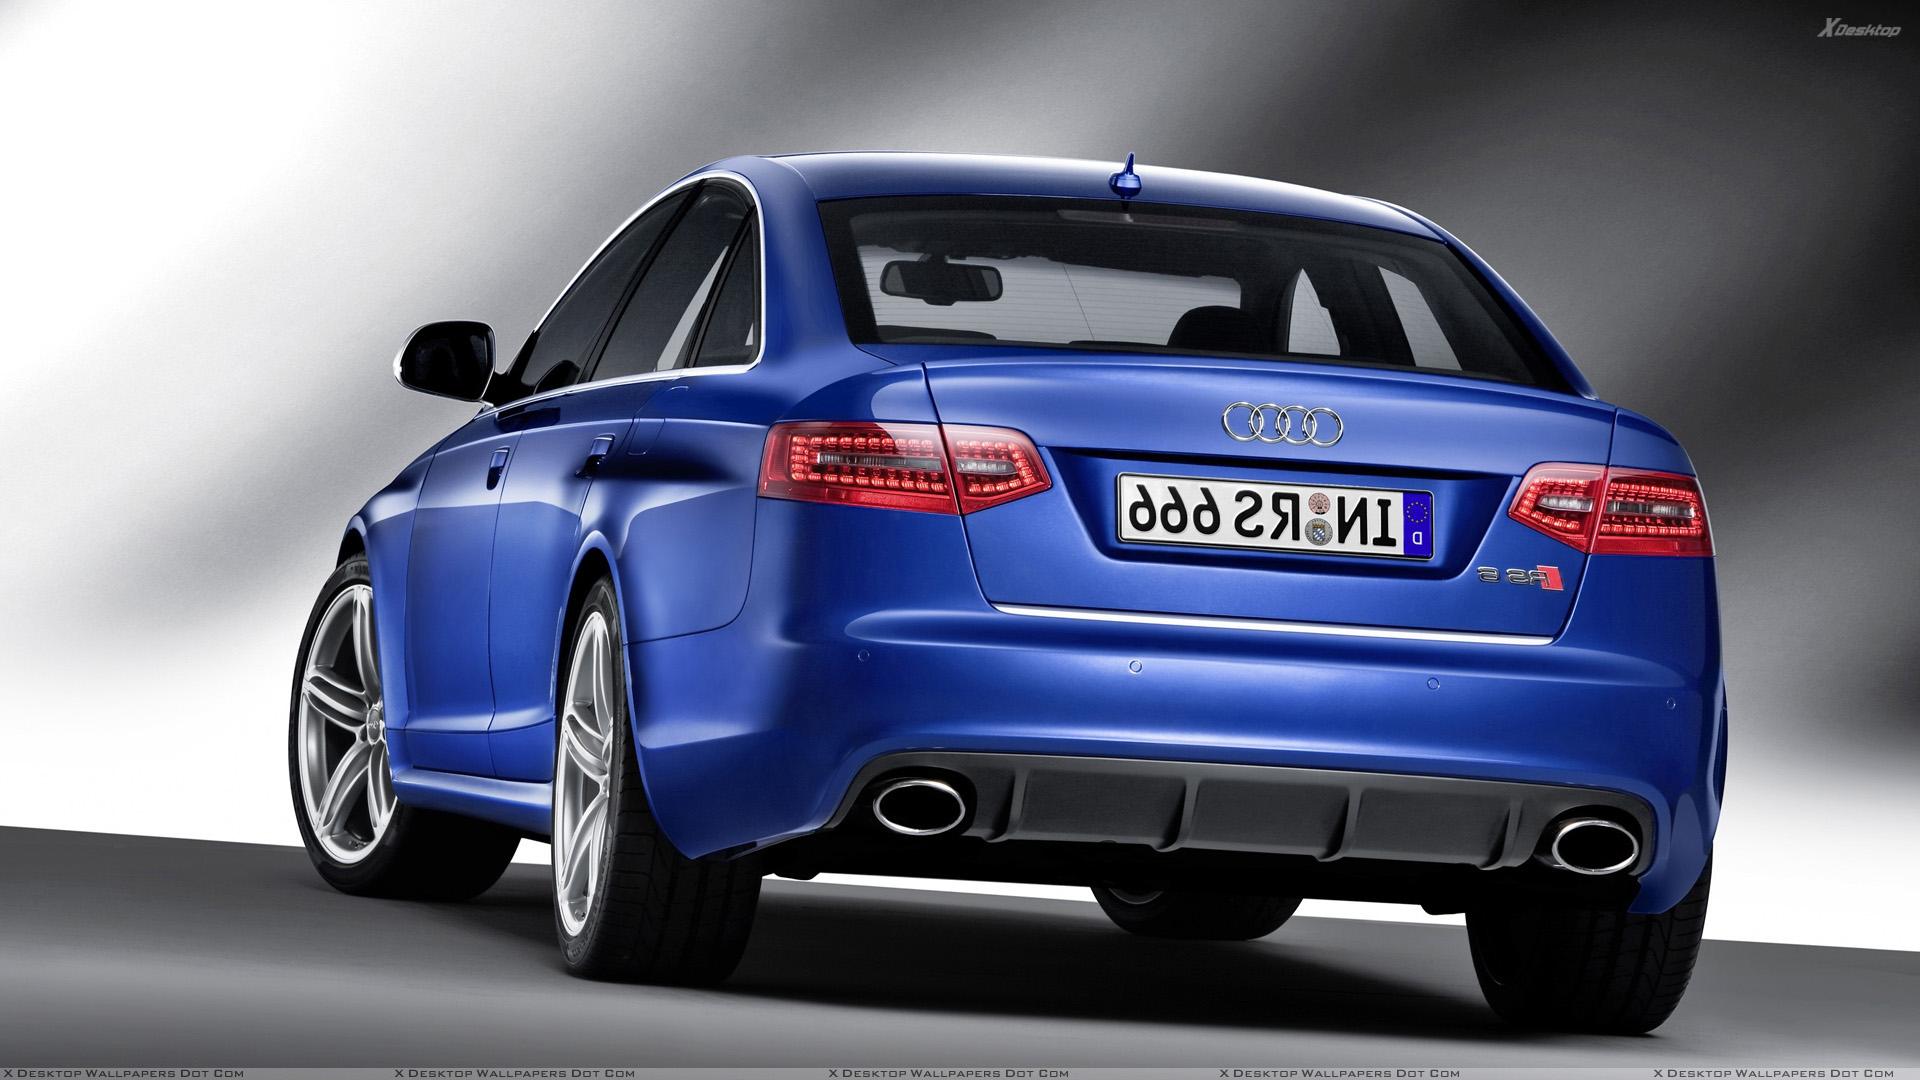 Audi RS6 Wallpaper, Photo & Image in HD